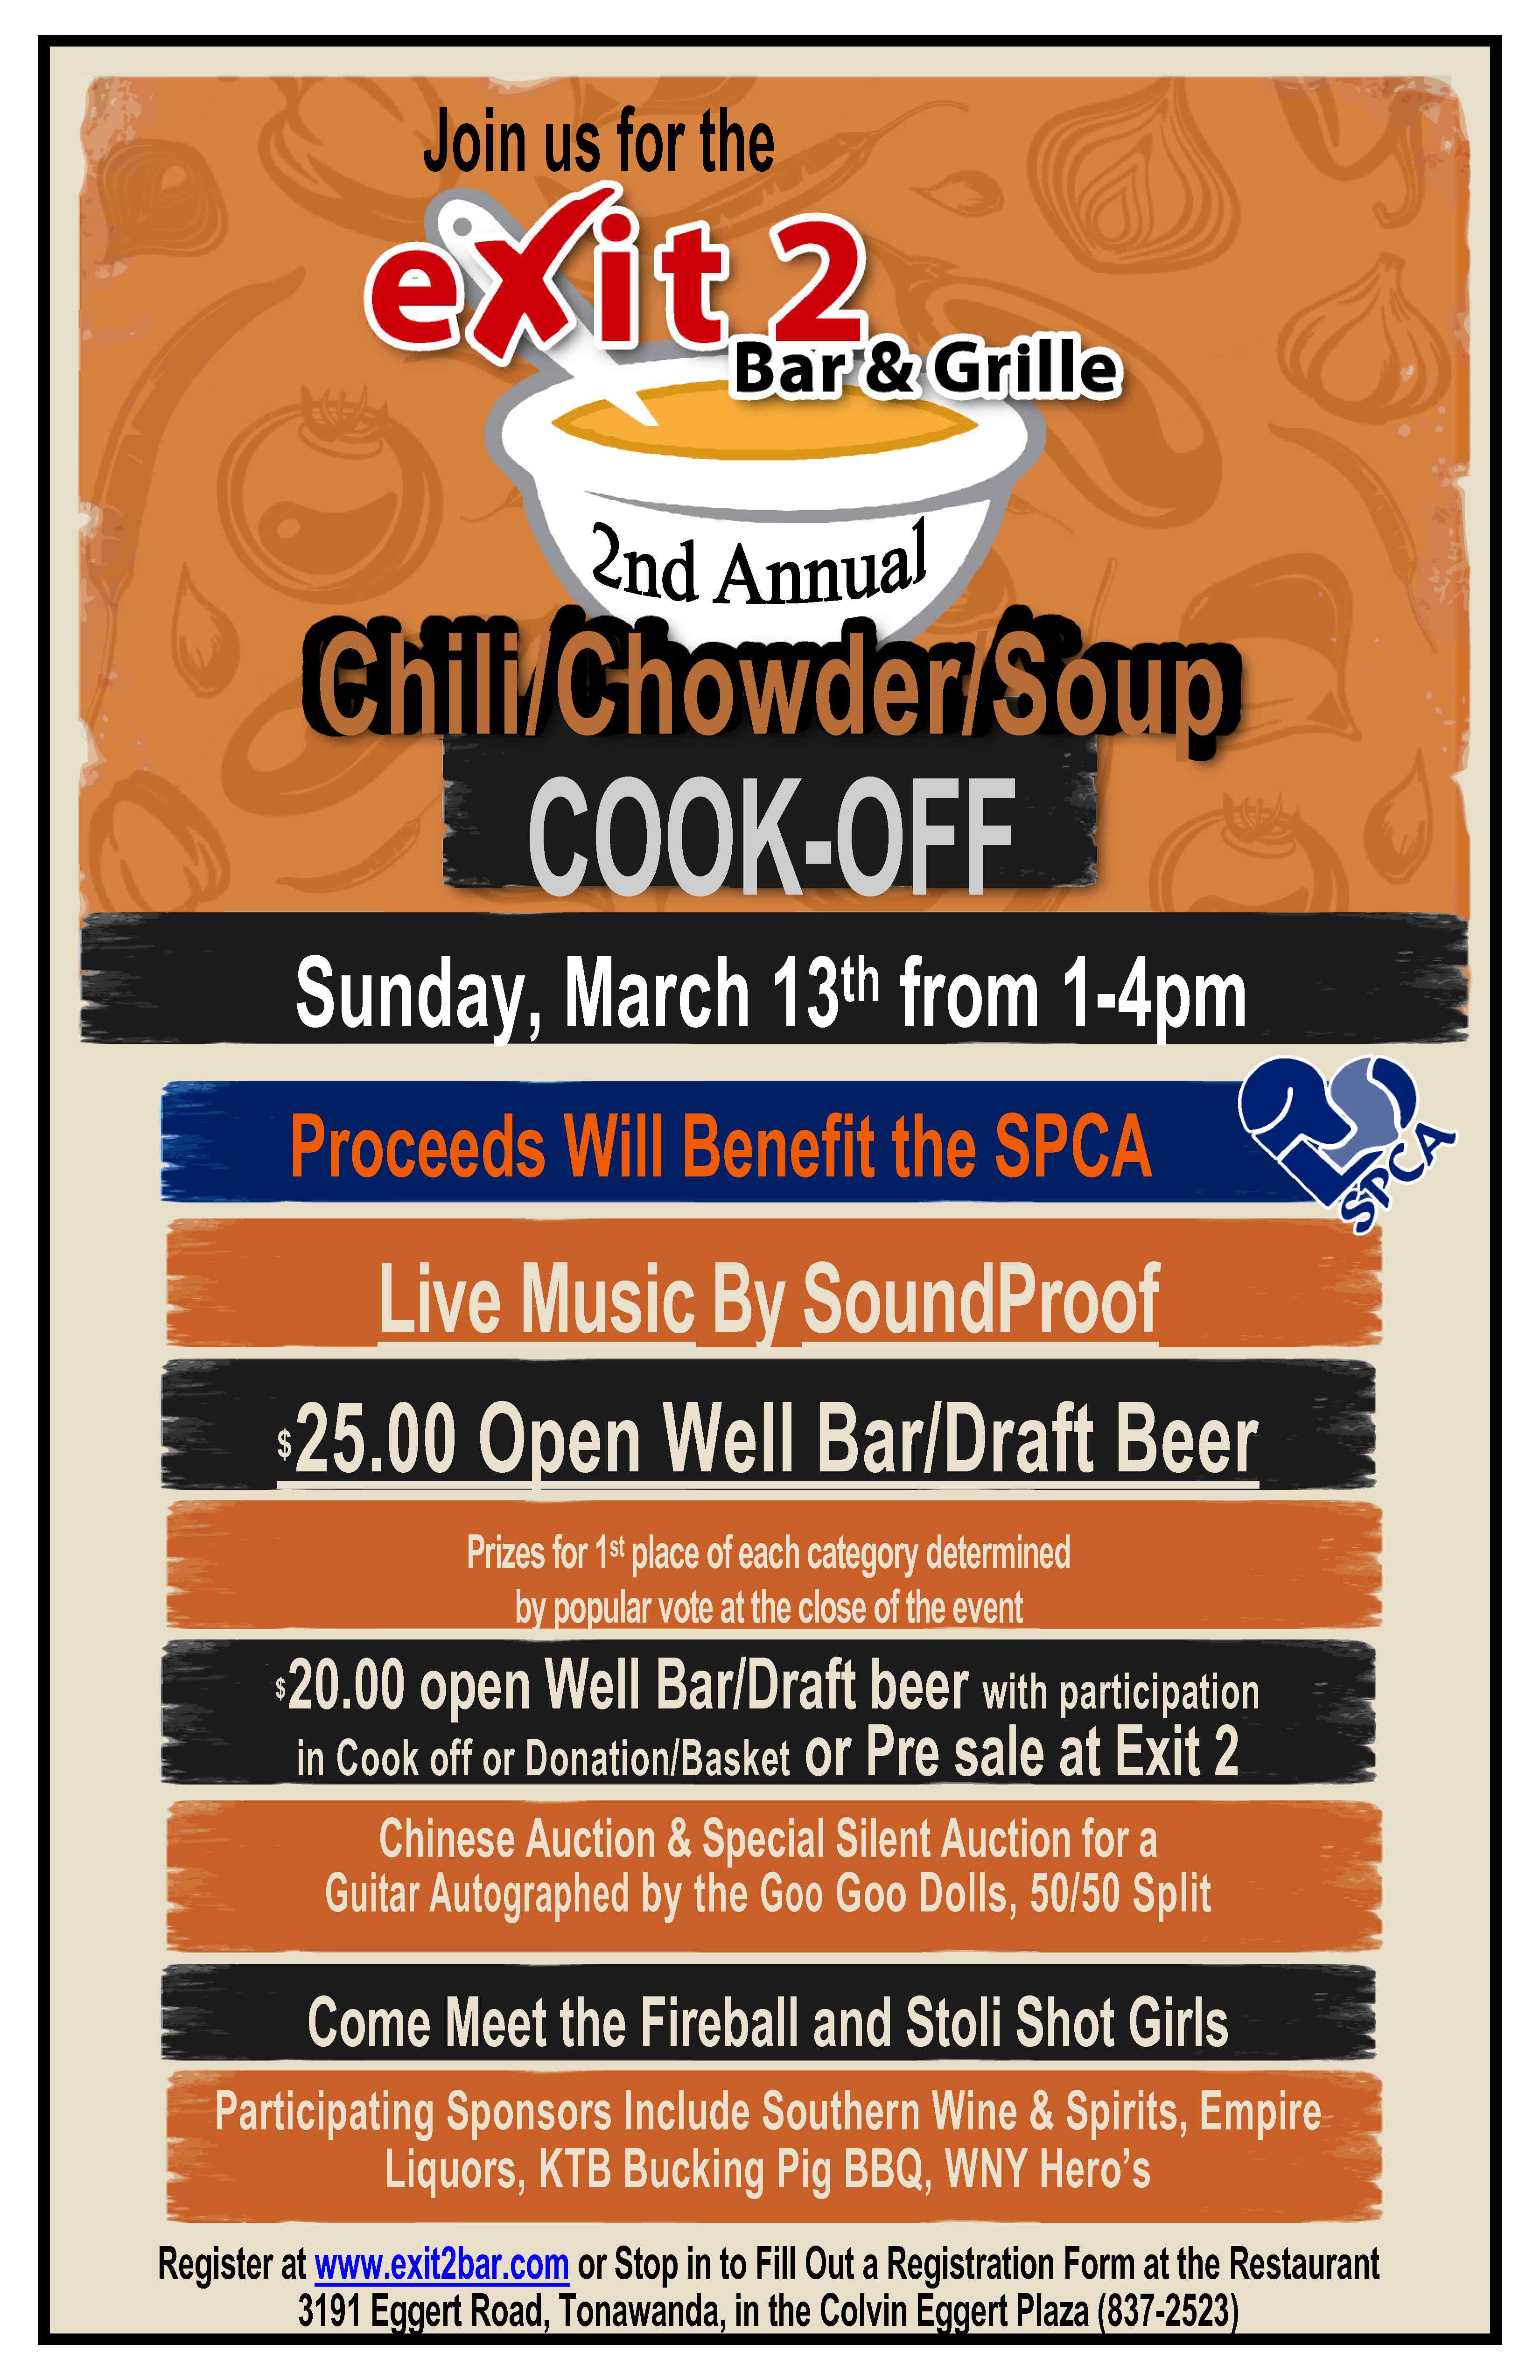 Exit 2 Bar & Grille plans SPCA benefit, Paint Night and more